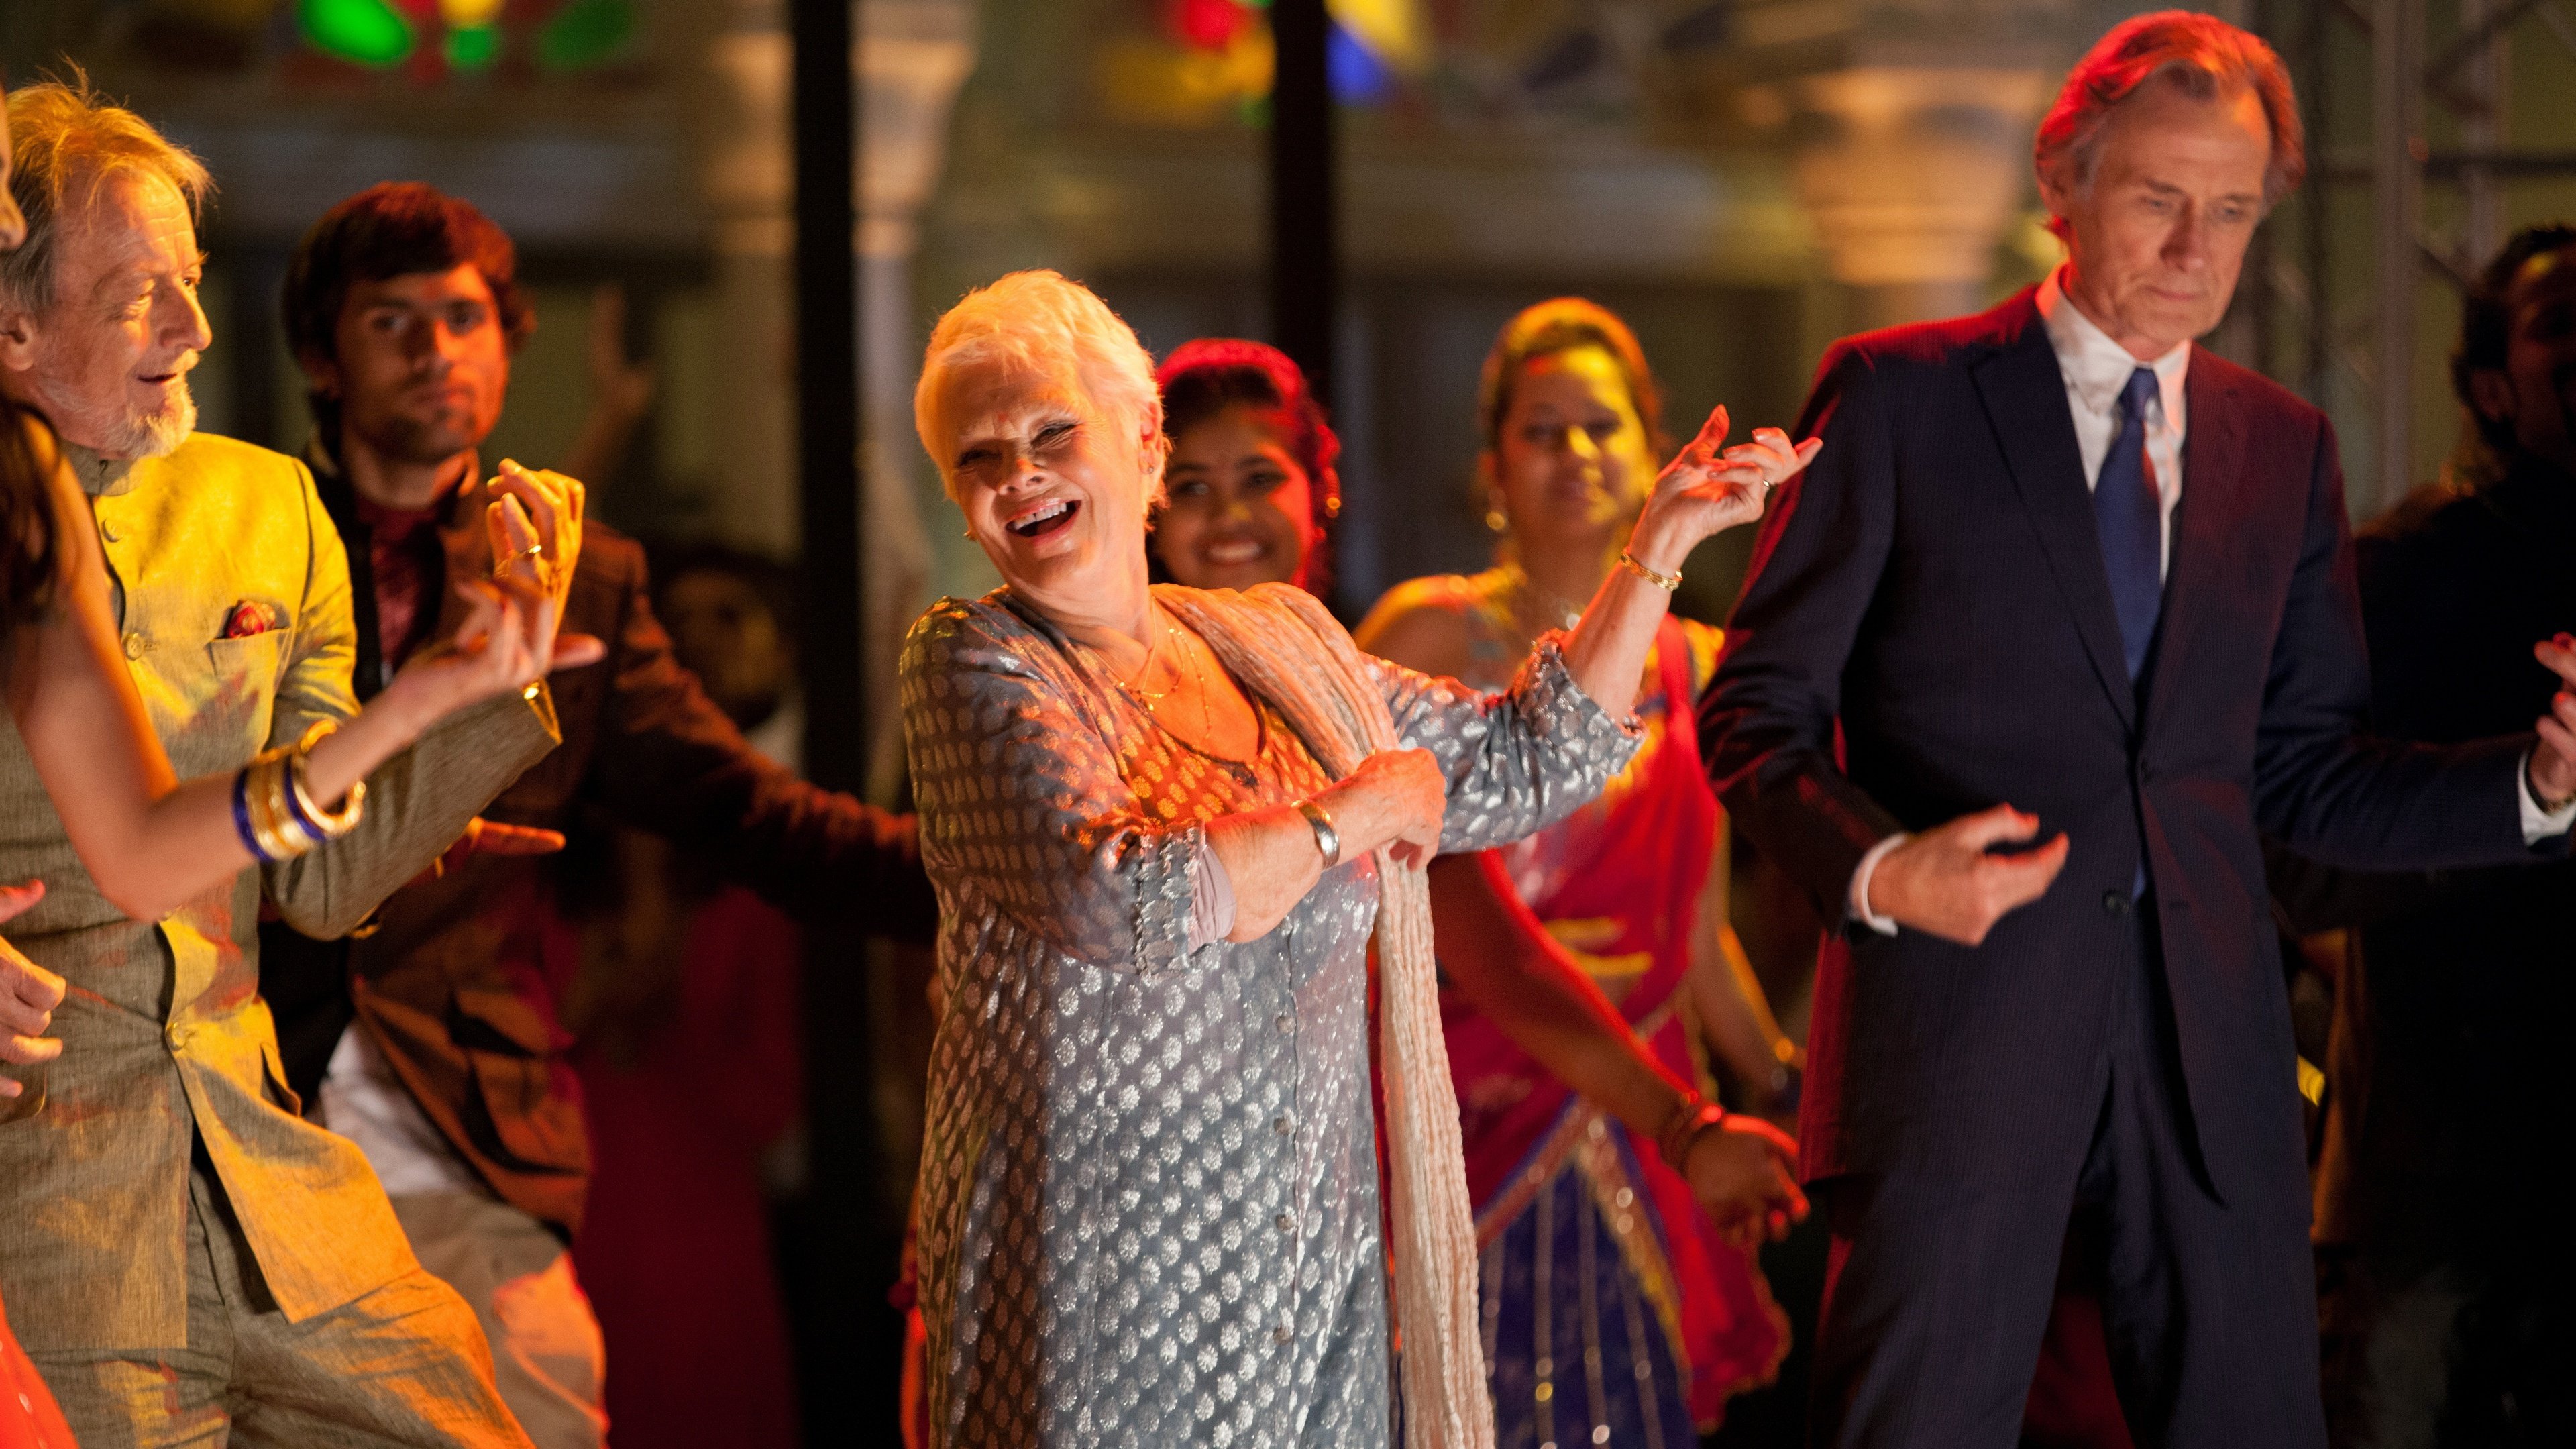 The Second Best Exotic Marigold Hotel 4k Ultra HD Wallpaper